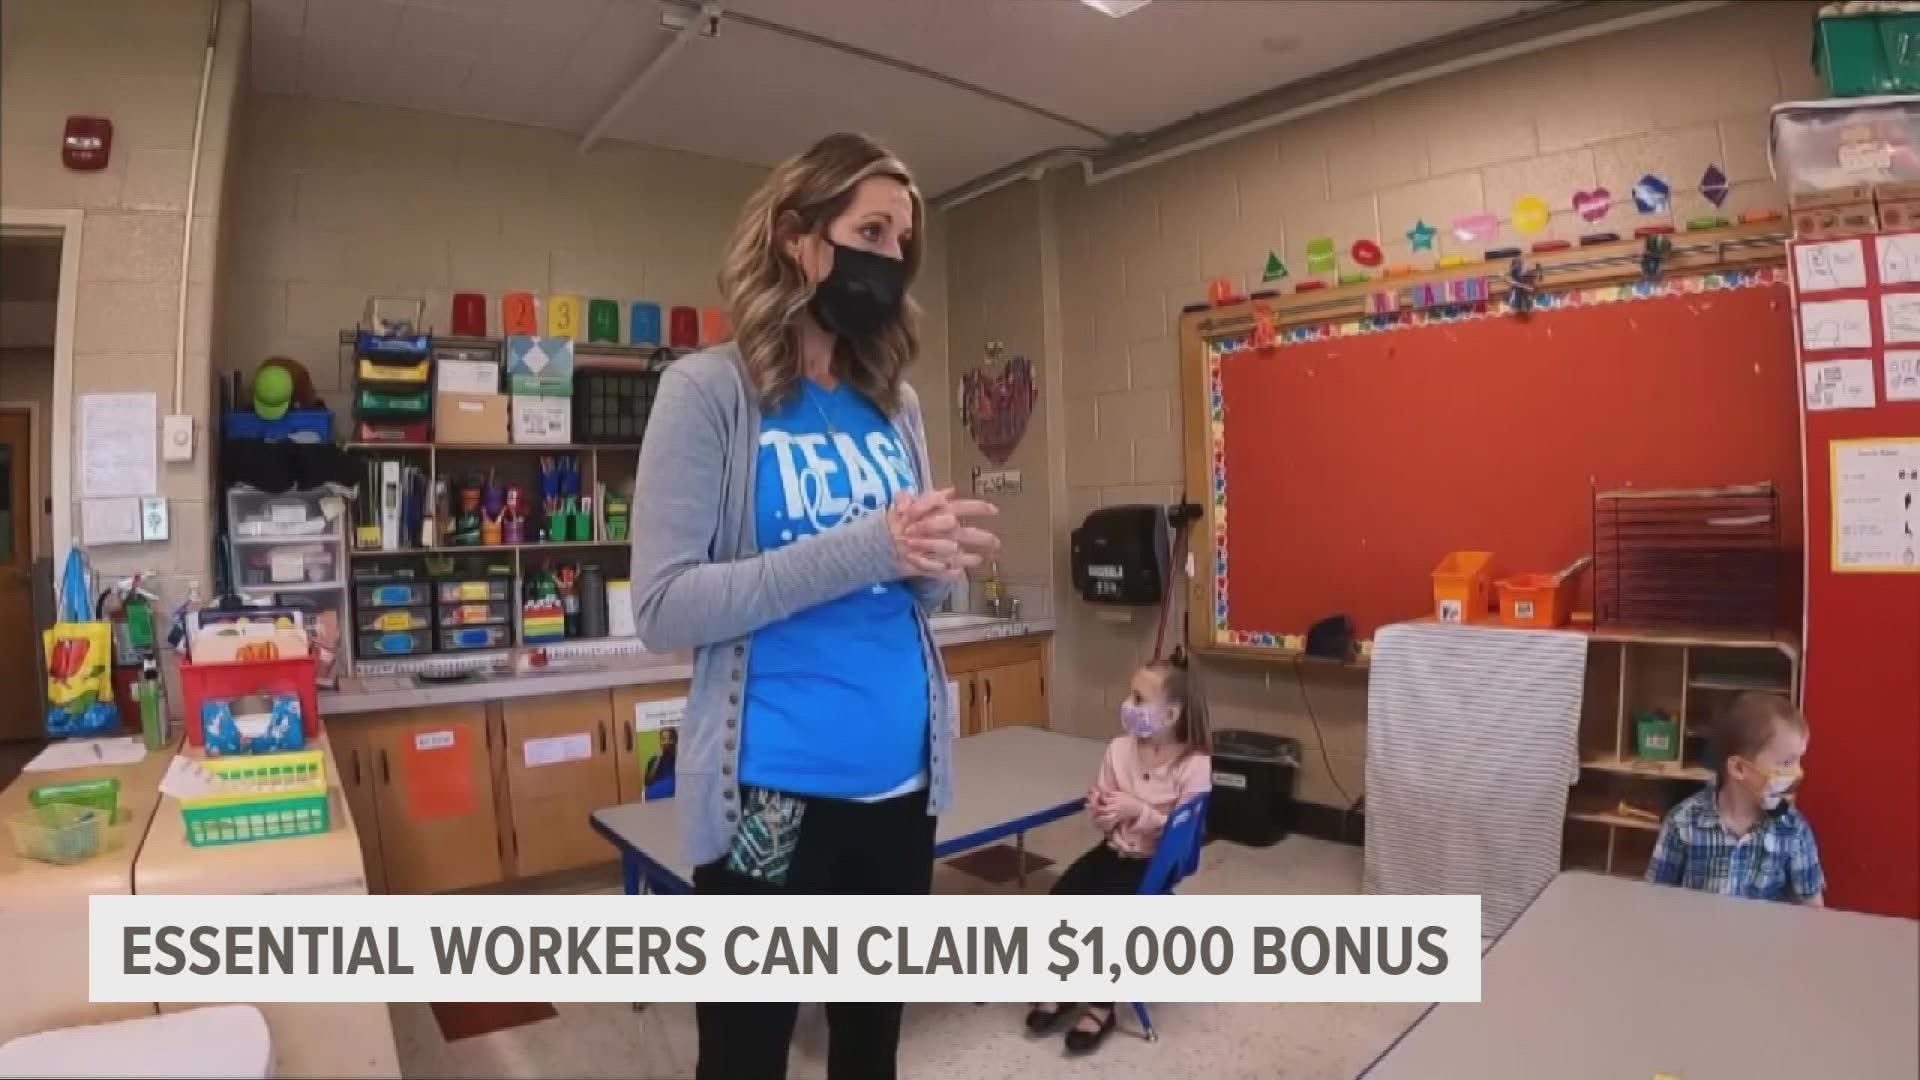 Teachers, child care workers, peace officers and corrections personnel working through the pandemic are eligible for the $1,000 bonuses.